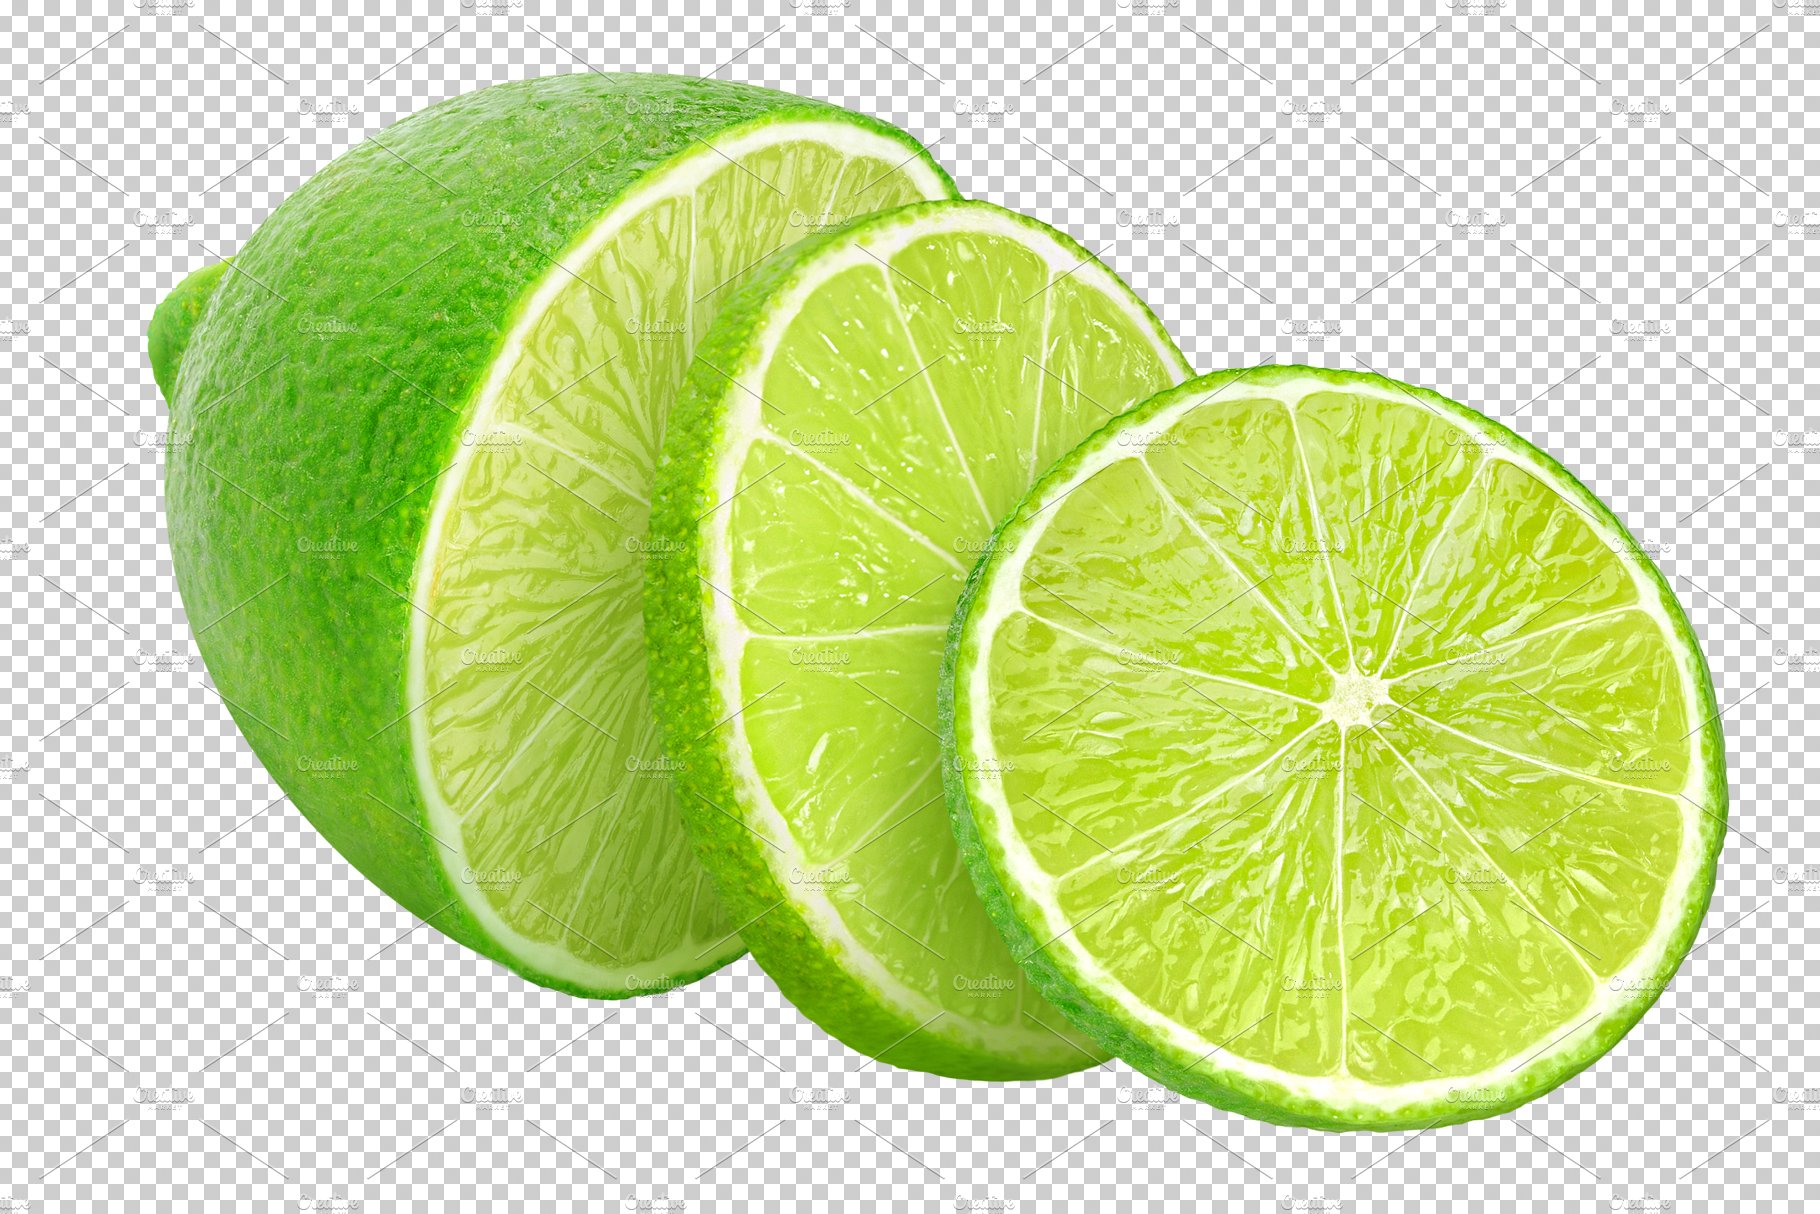 Sliced lime preview image.